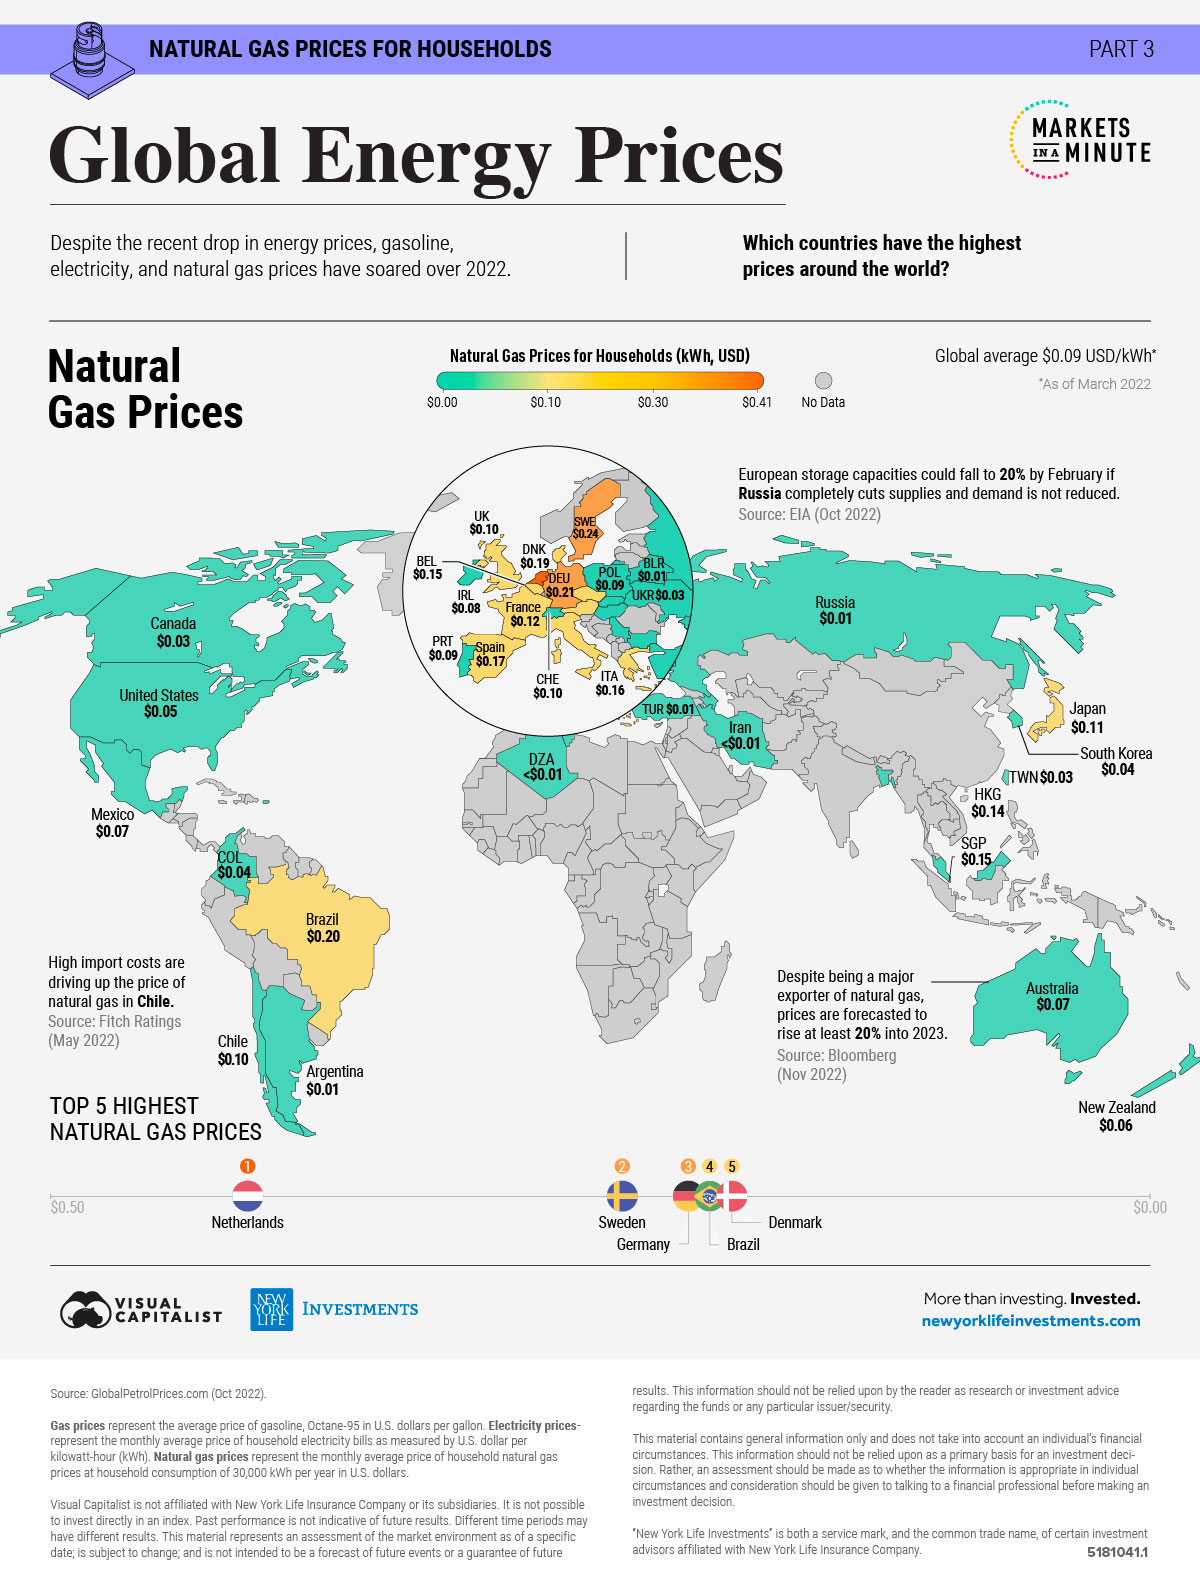 Mapped Global Energy Prices, by Country in 2022